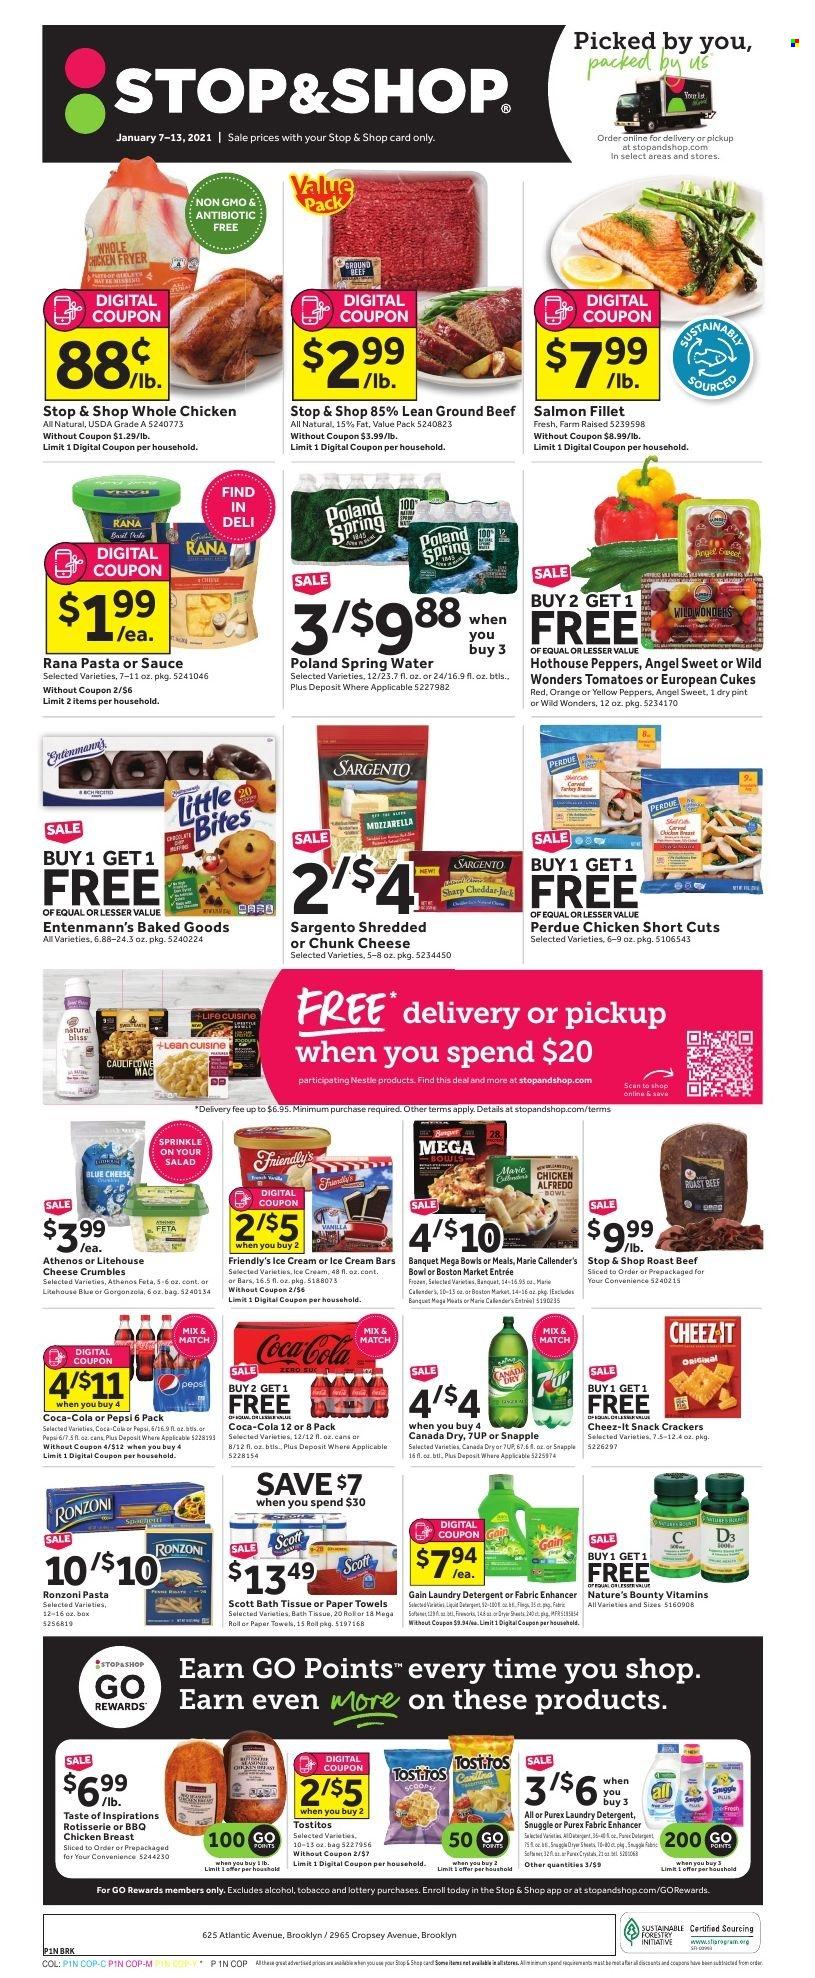 thumbnail - Stop & Shop Flyer - 01/07/2022 - 01/13/2022 - Sales products - Entenmann's, tomatoes, salad, oranges, whole chicken, chicken breasts, Perdue®, beef meat, ground beef, roast beef, salmon, salmon fillet, Lean Cuisine, Marie Callender's, Rana, blue cheese, cheese, feta, cheese crumbles, chunk cheese, Sargento, ice cream, ice cream bars, Friendly's Ice Cream, Nestlé, snack, crackers, Little Bites, Cheez-It, Tostitos, Canada Dry, Coca-Cola, Pepsi, 7UP, Snapple, spring water, beer, bath tissue, Scott, kitchen towels, paper towels, Gain, Snuggle, laundry detergent, Purex, Nature's Bounty, vitamin D3. Page 1.